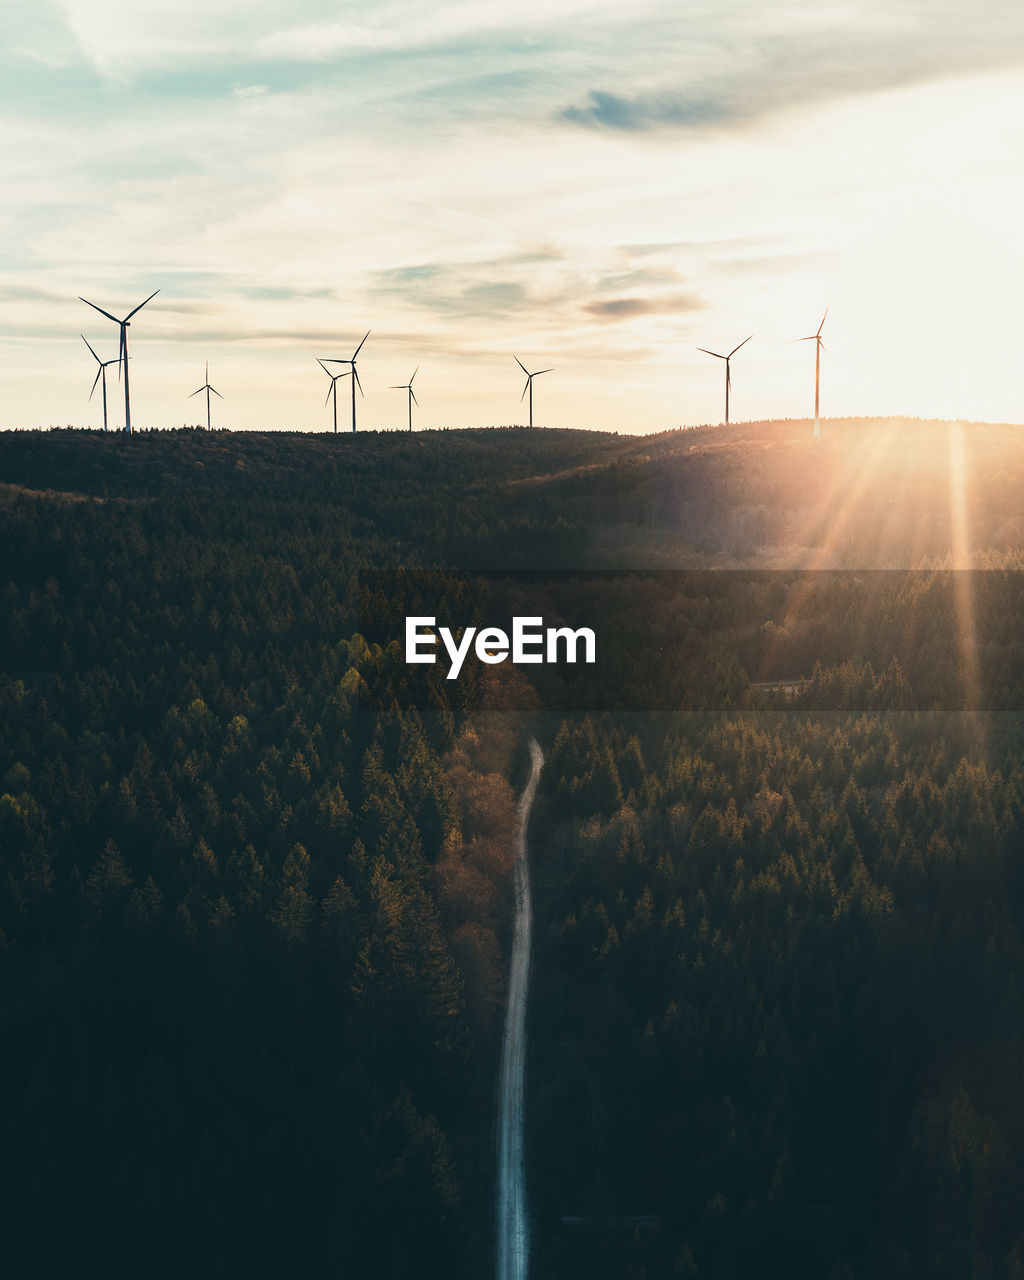 Cinematic aerial view of wind turbines and hiking road in the forest. warm teal and orange look.